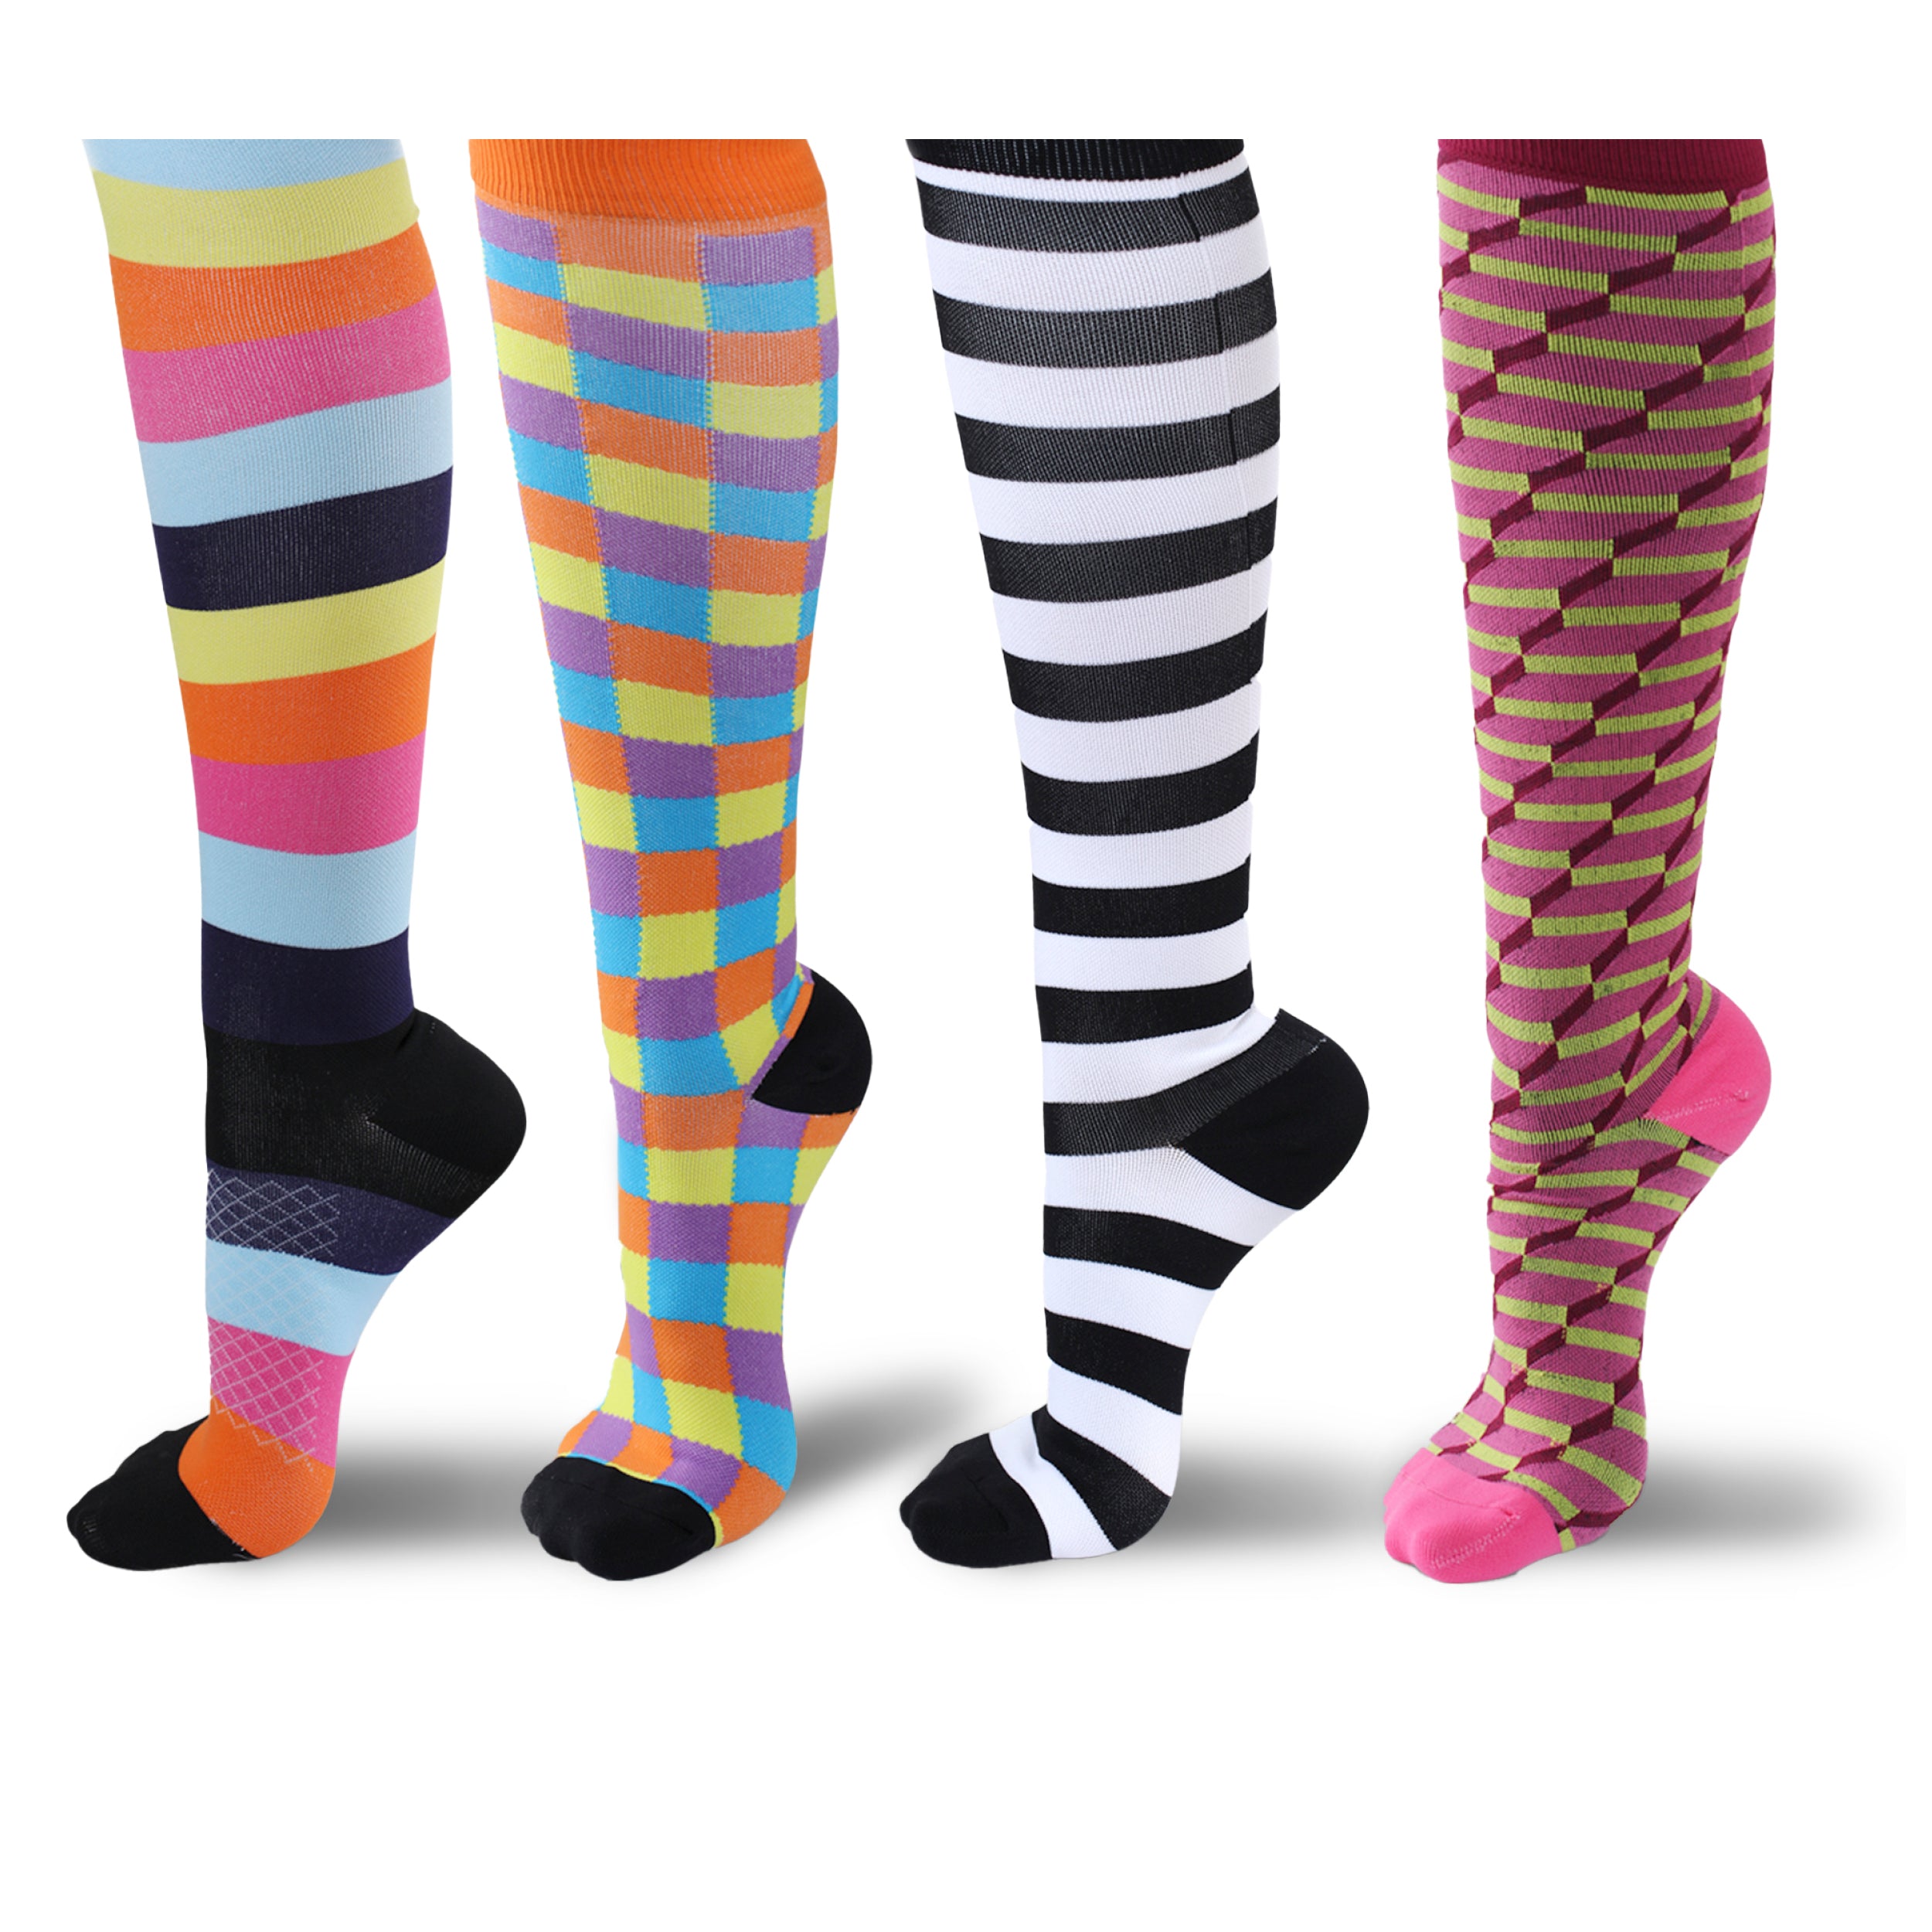 Four other different colors and designs of compression socks 